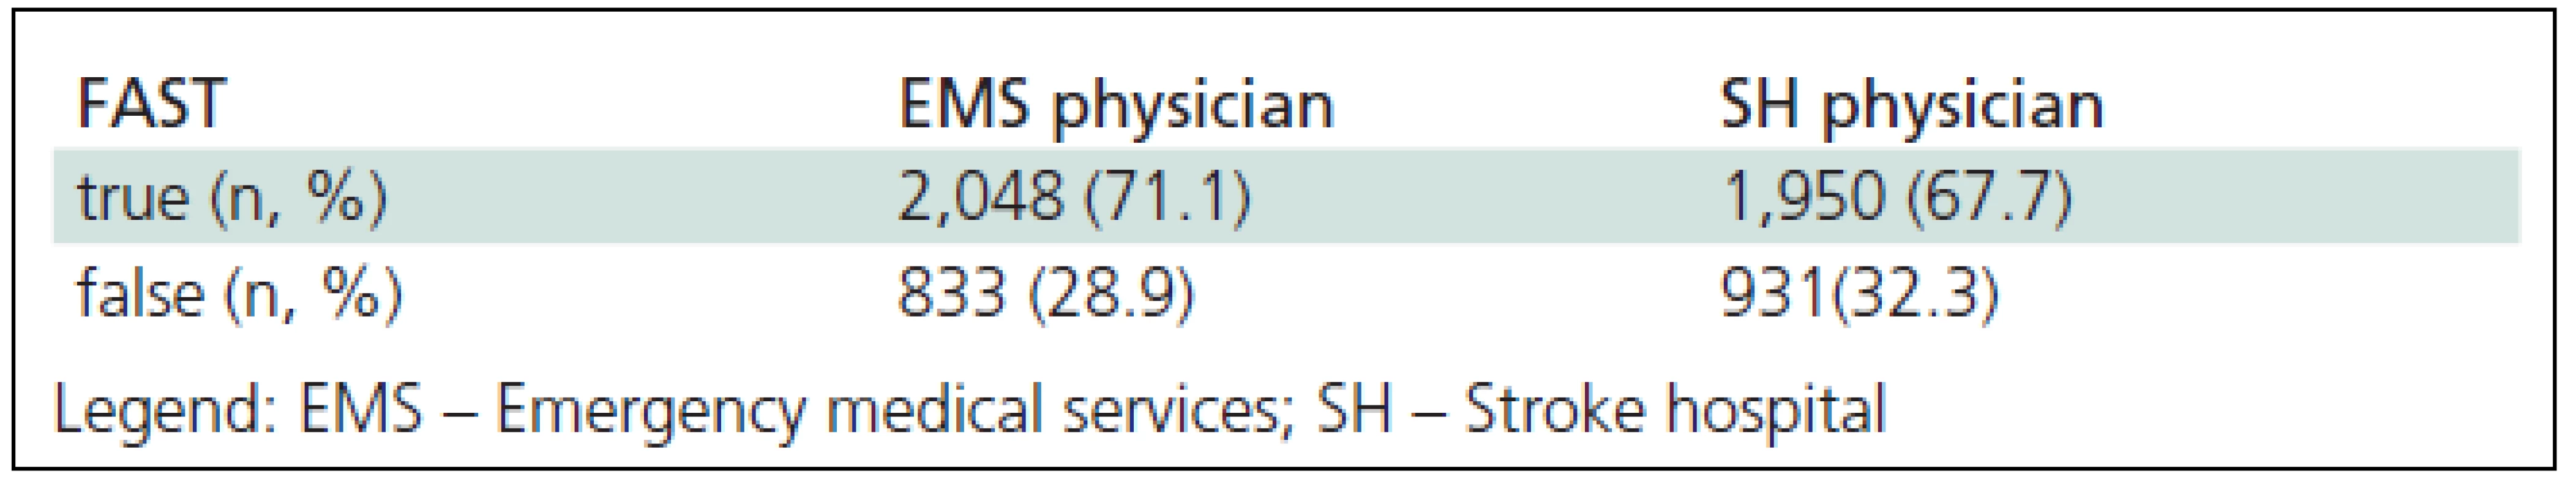 Agreement between FAST (Face Arm Speech Test) deficit evaluation by a dispatcher and physician examination in stroke patients pre-hospital and hospital (n = 2,881).